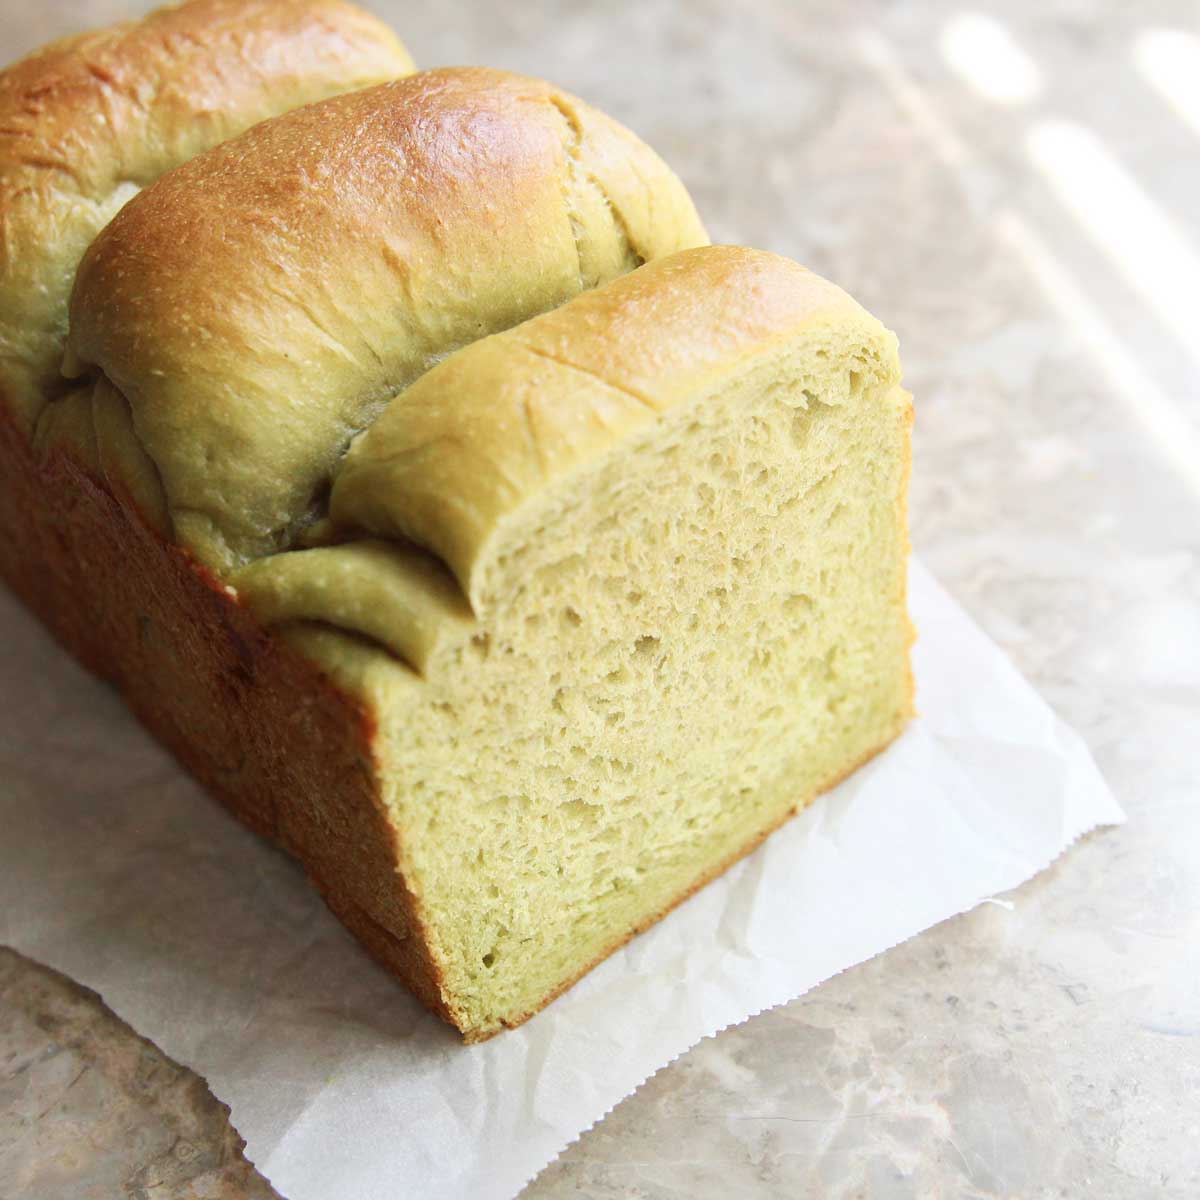 10 Healthy & Vegan Yeast Bread Recipes Made With Fruits And Veggies - yeast bread